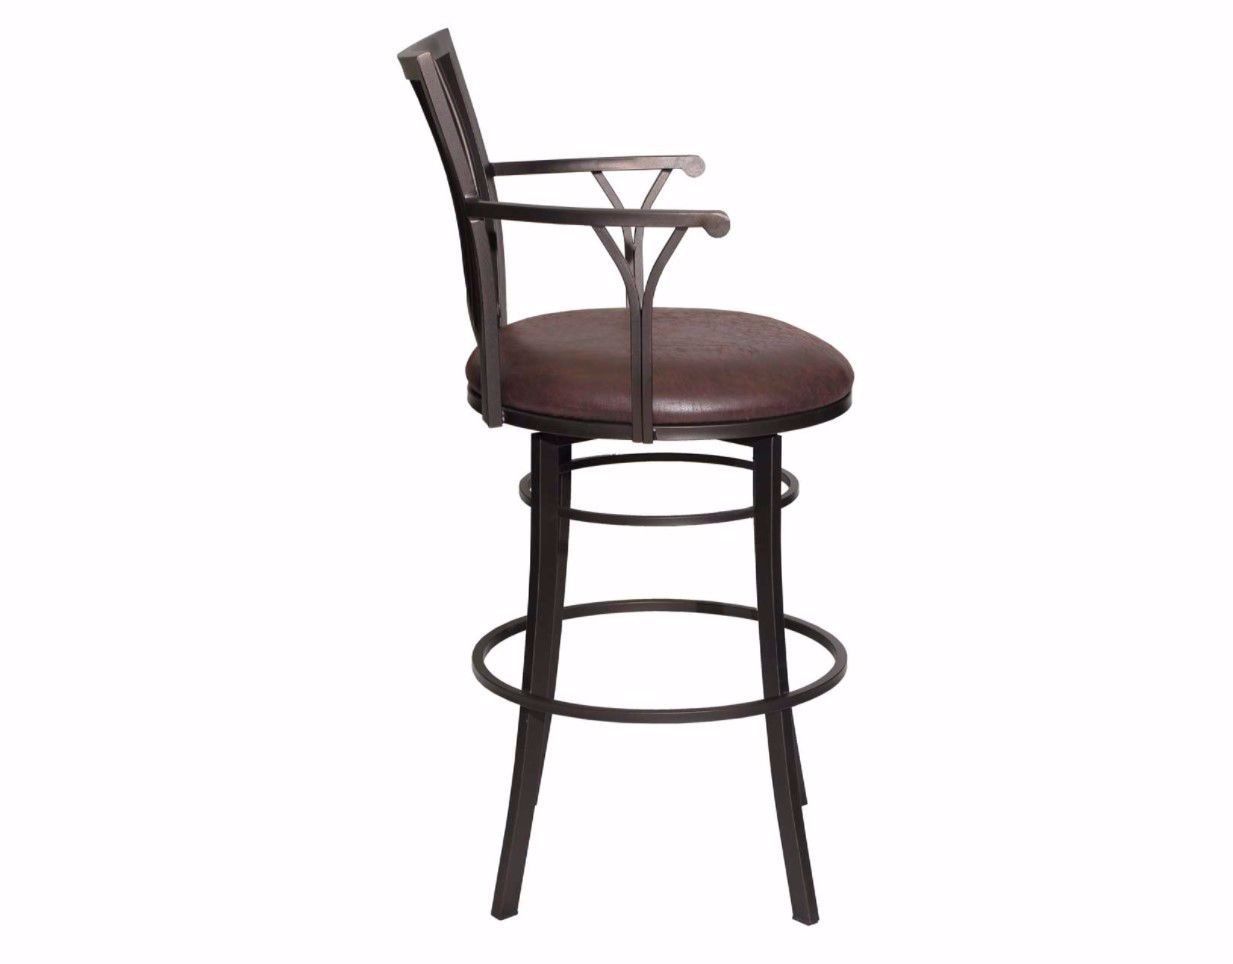 Picture of Bayview Swivel Bar Stool